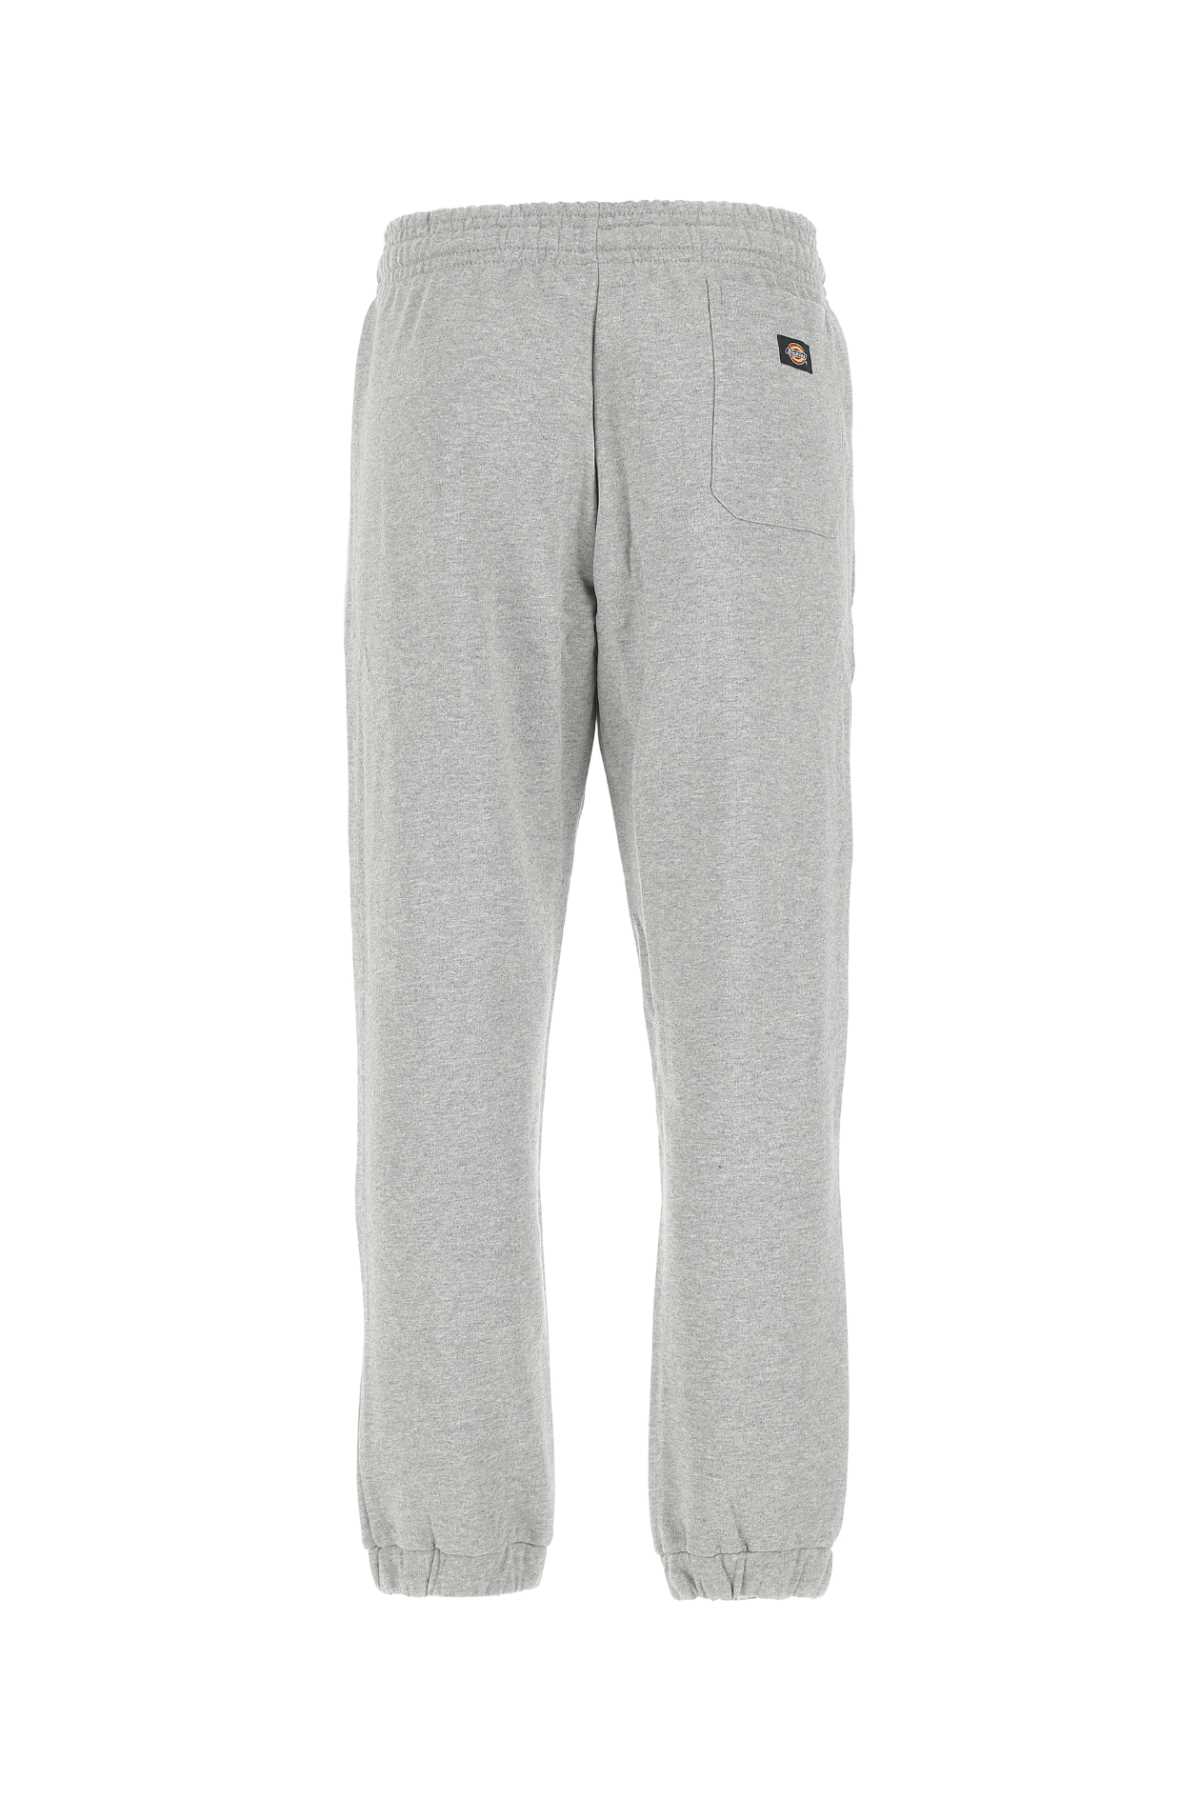 Dickies Grey Cotton Blend Bienville Joggers In Gym1